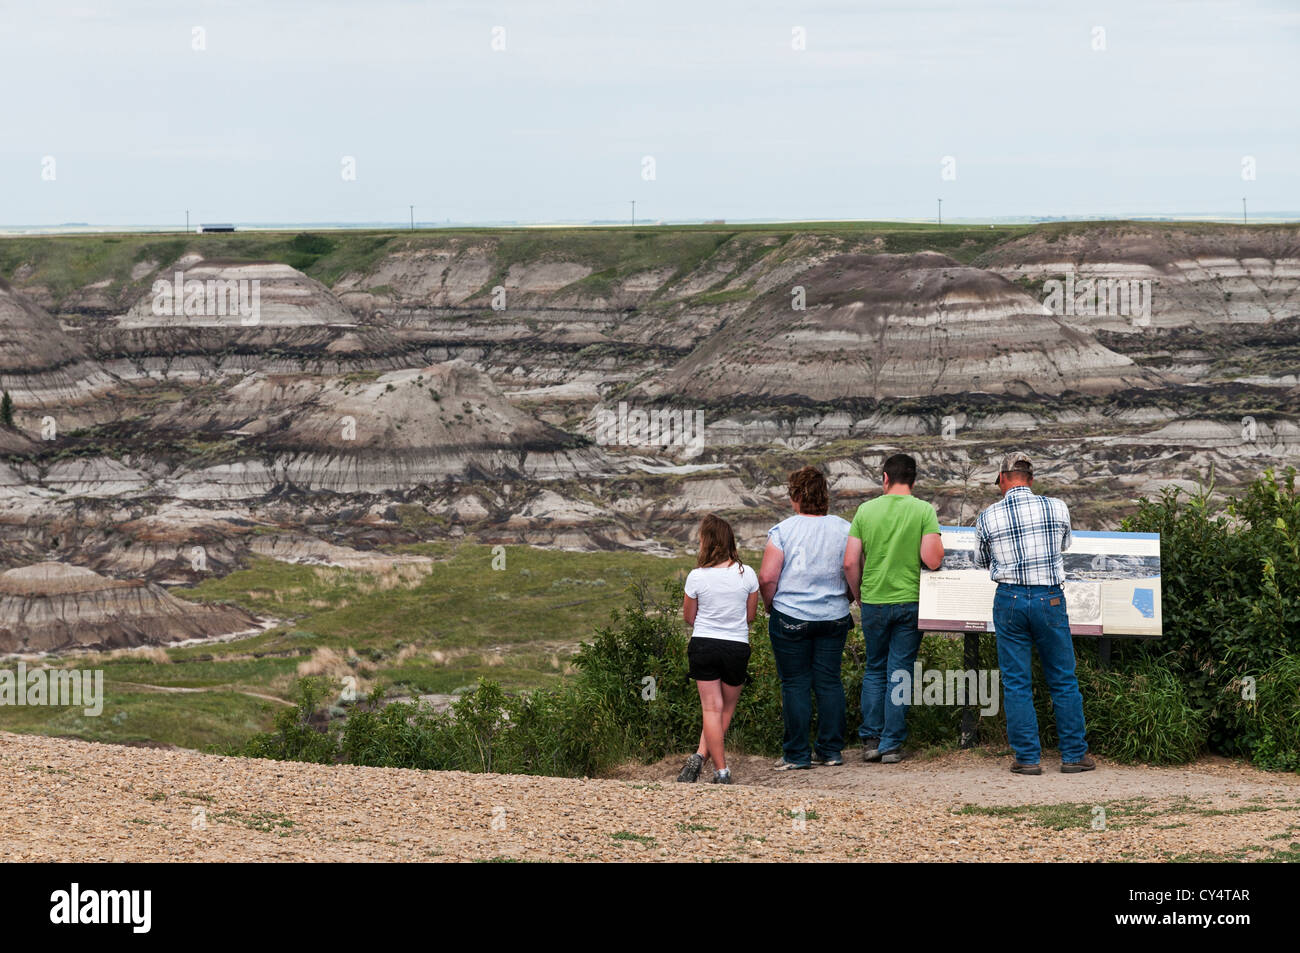 A vacationing family of four visits Horseshoe Canyon located in Alberta Canada's badlands near the town of Drumheller. Stock Photo